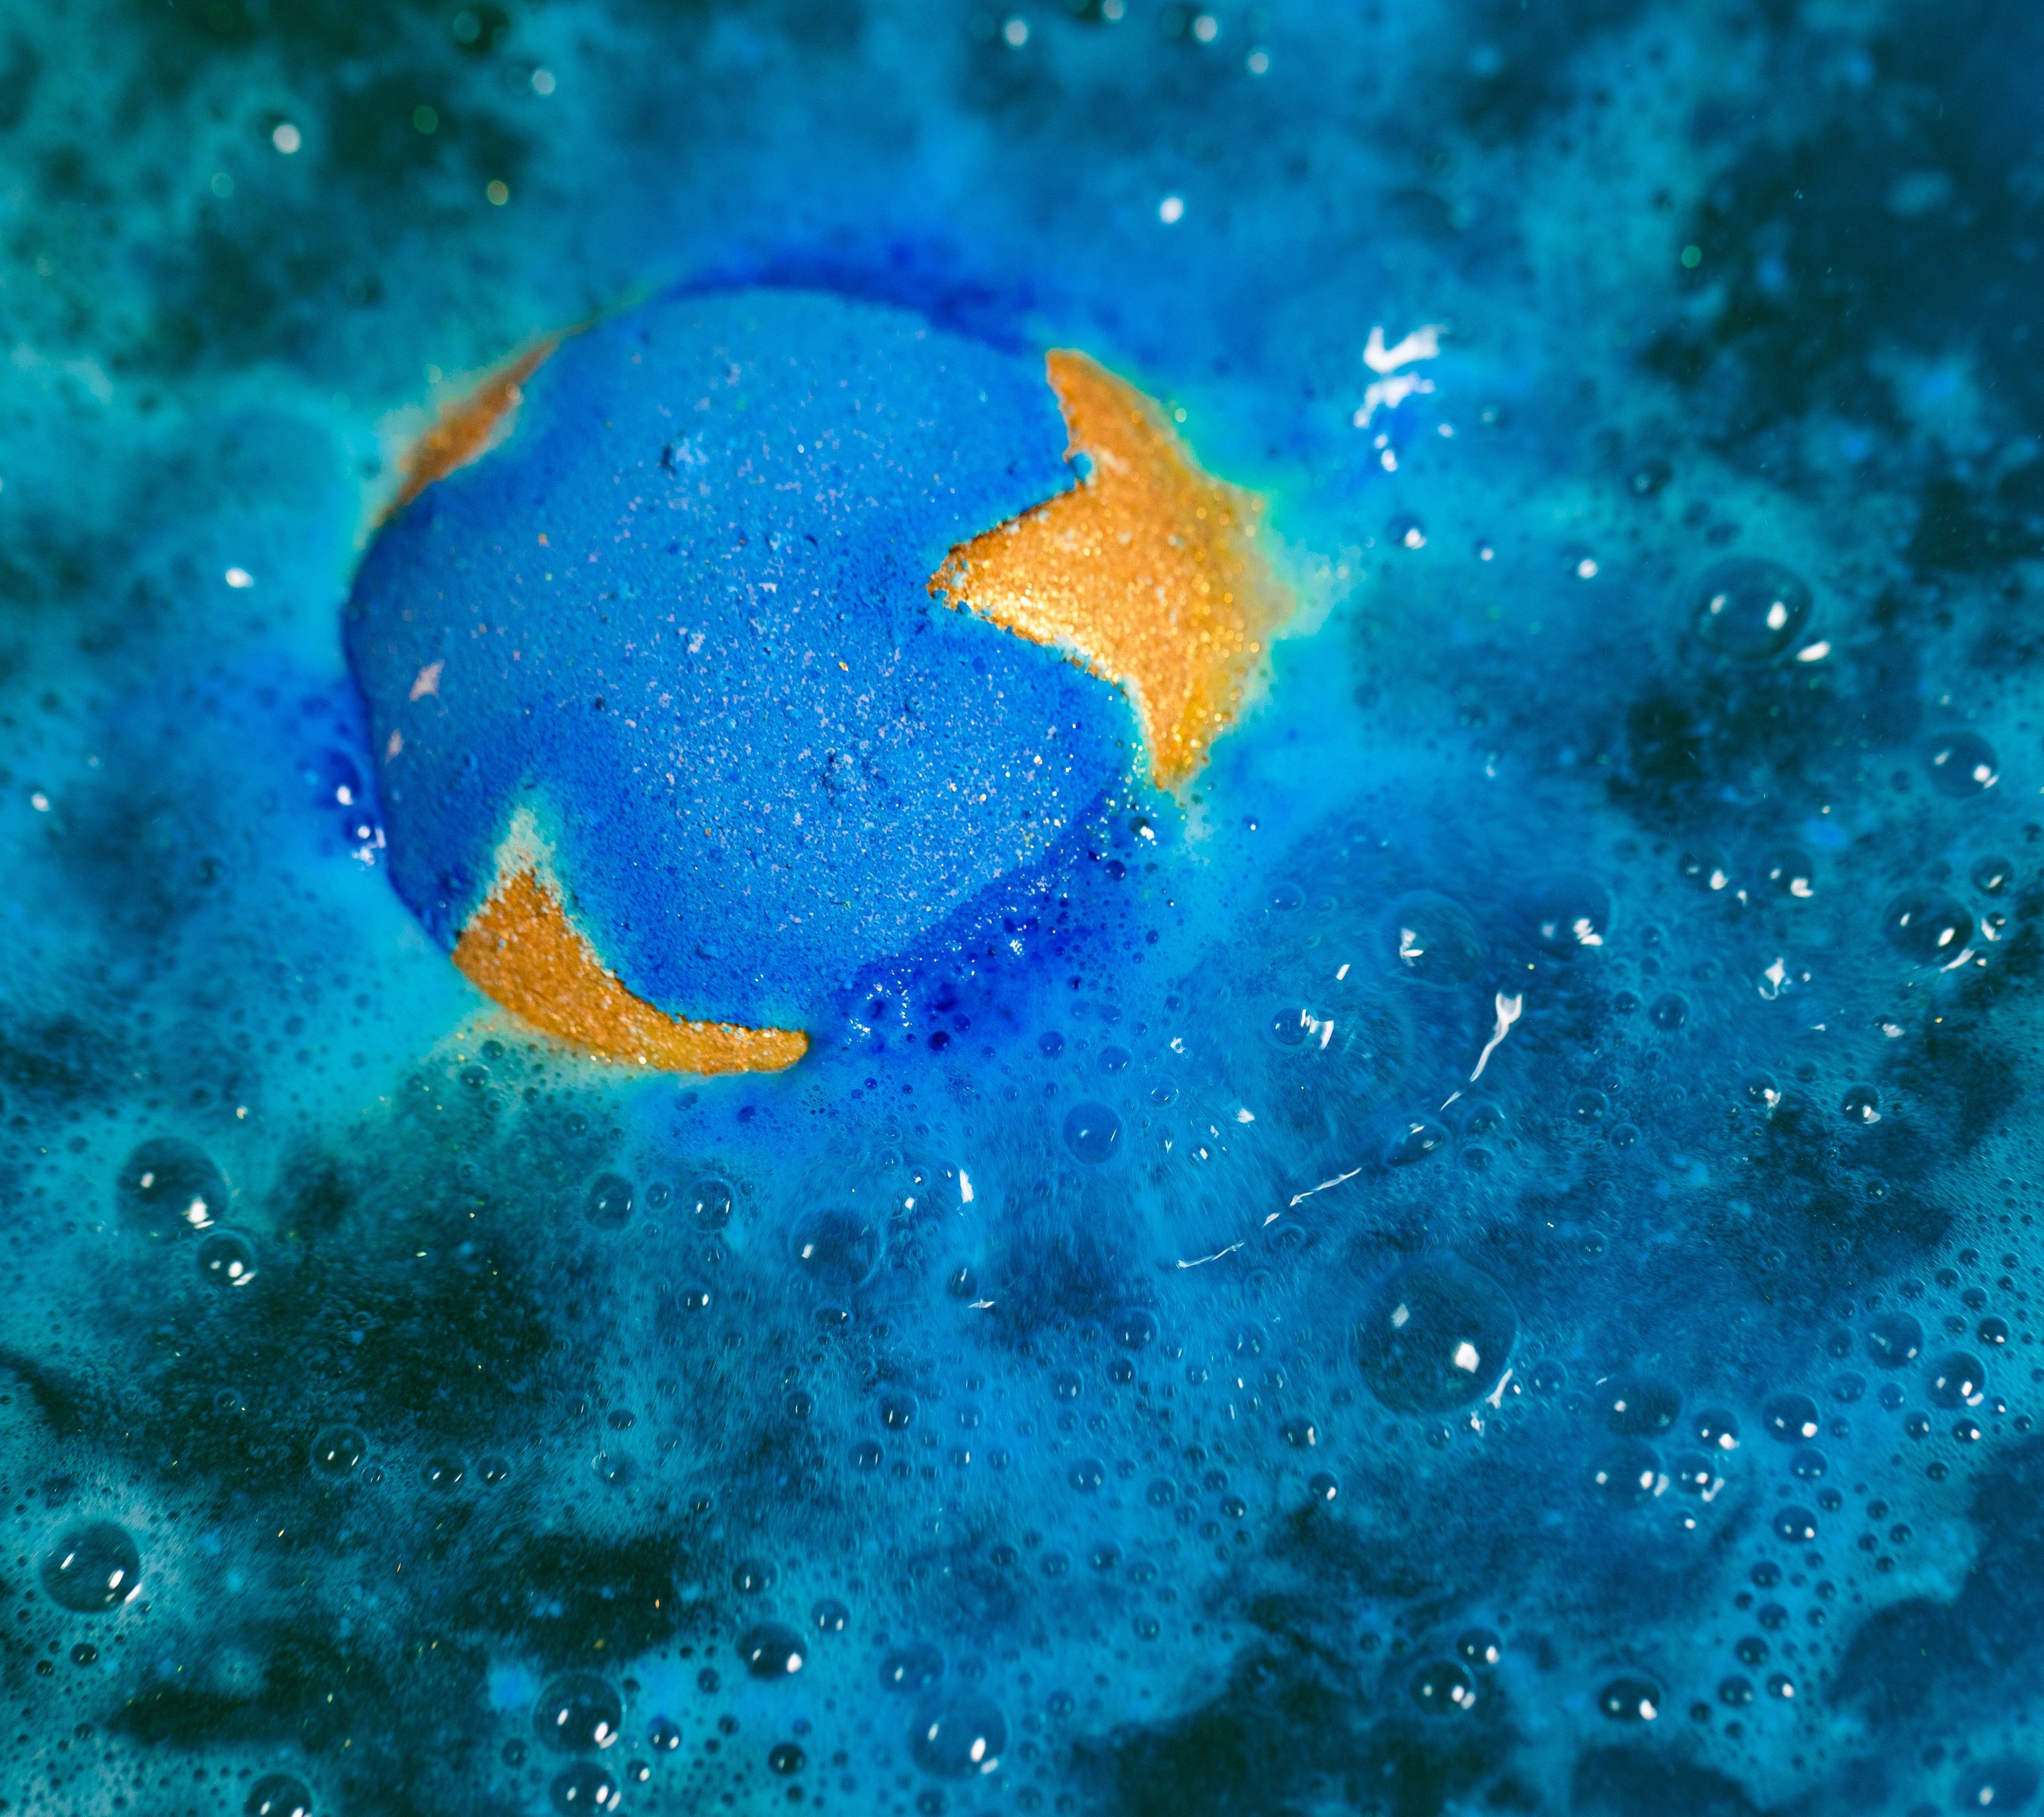 Shoot for The Stars bath bomb dissolves in the bath creating an intense, deep-blue galaxy of foamy bubbles